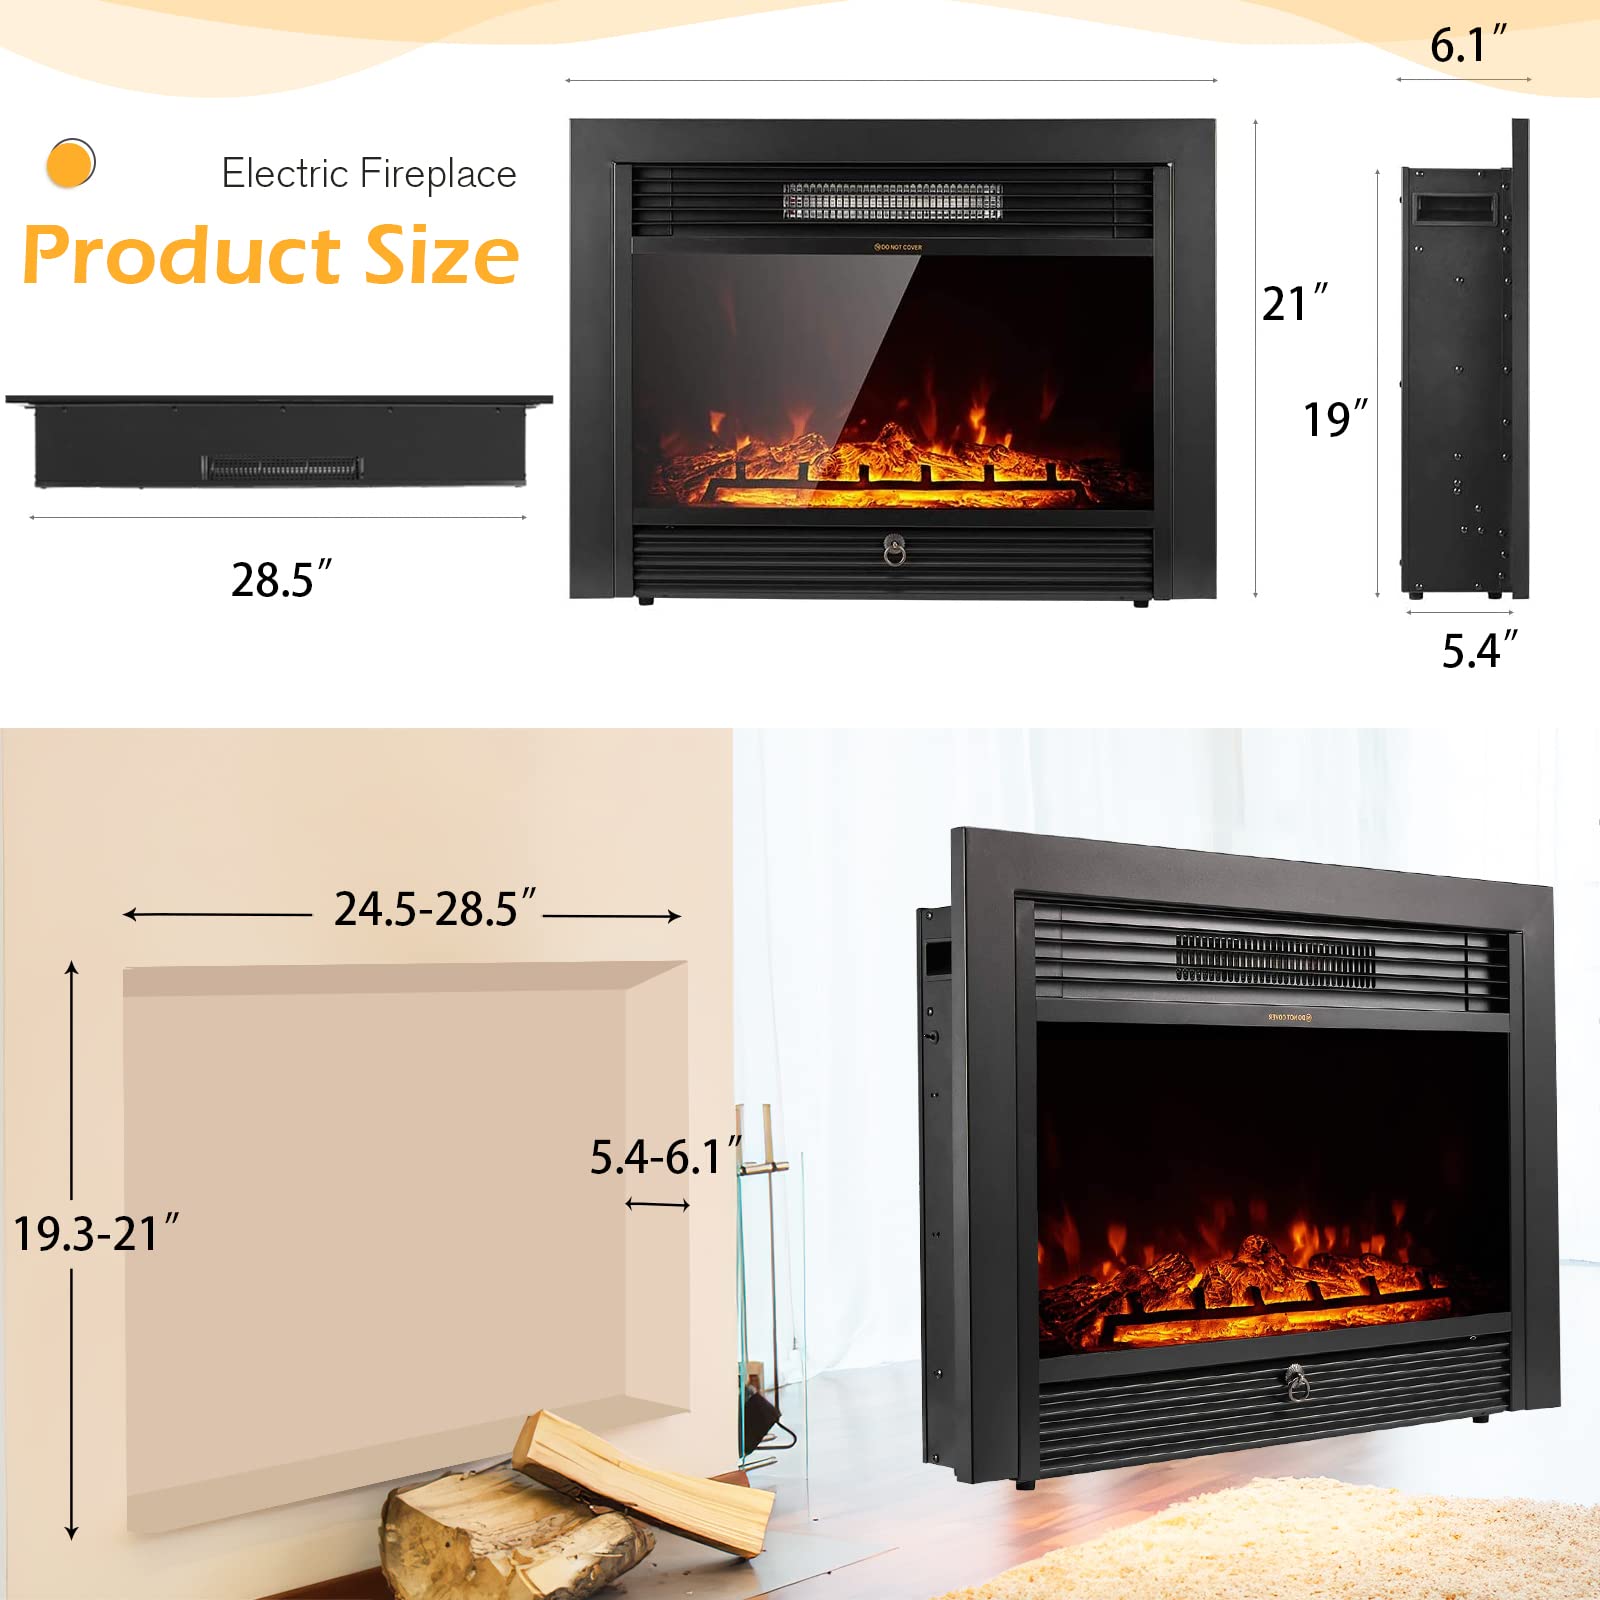 Homedex 28.5" Electric Fireplace Insert Recessed Mounted with 3 Color Flames, 750/1500W Fireplace Electric with Remote Control and Timer, Standing Fireplace Heater